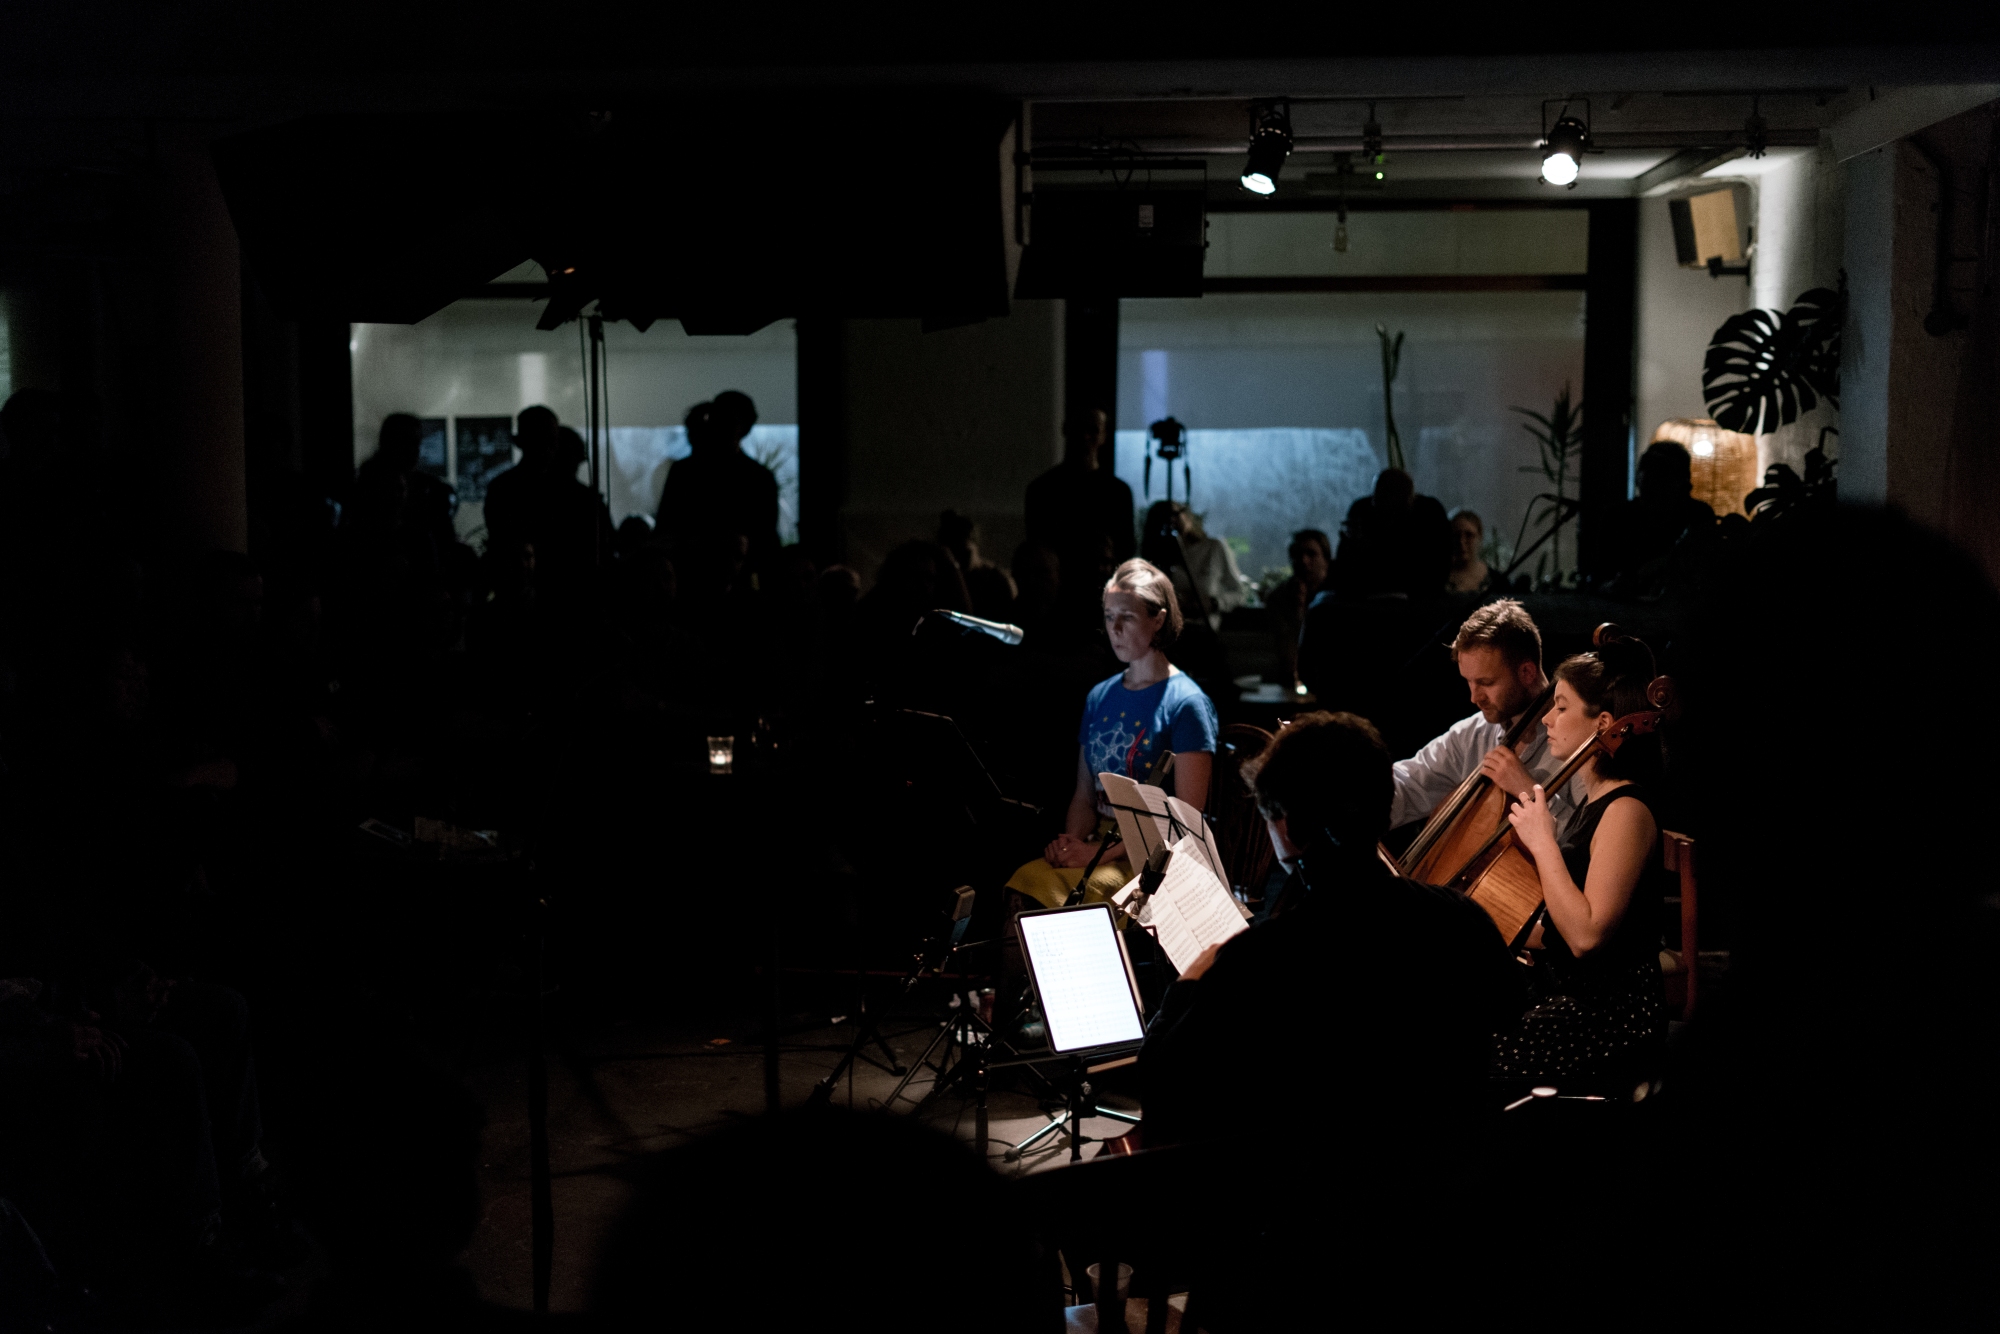 Photograph of a singer and three cellists performing in a dark and crowded room.